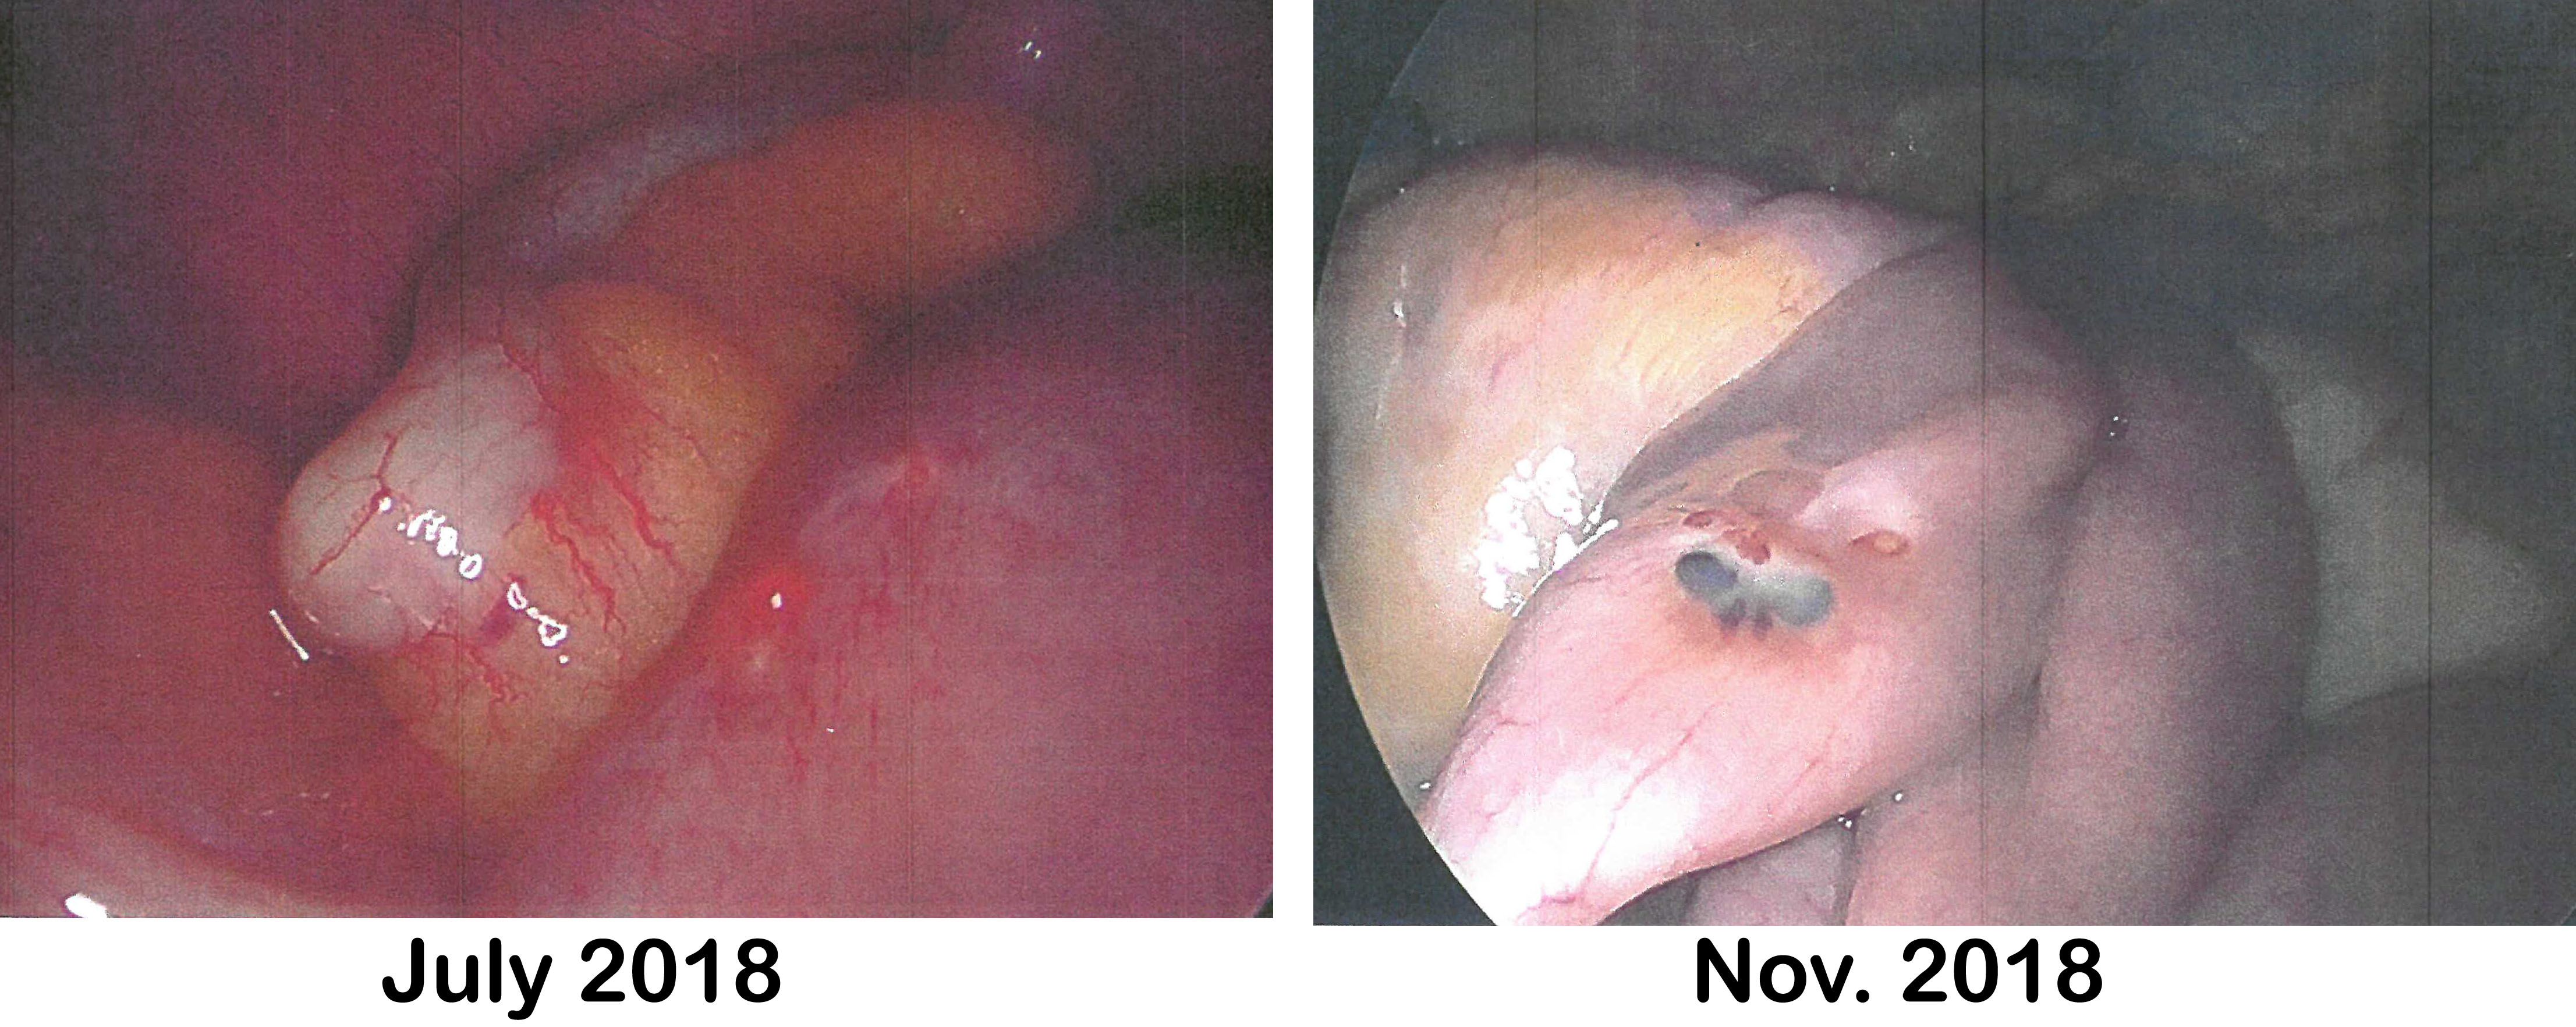 Comparison photos of July 2018 and November 2018 Endo lesions on bowel